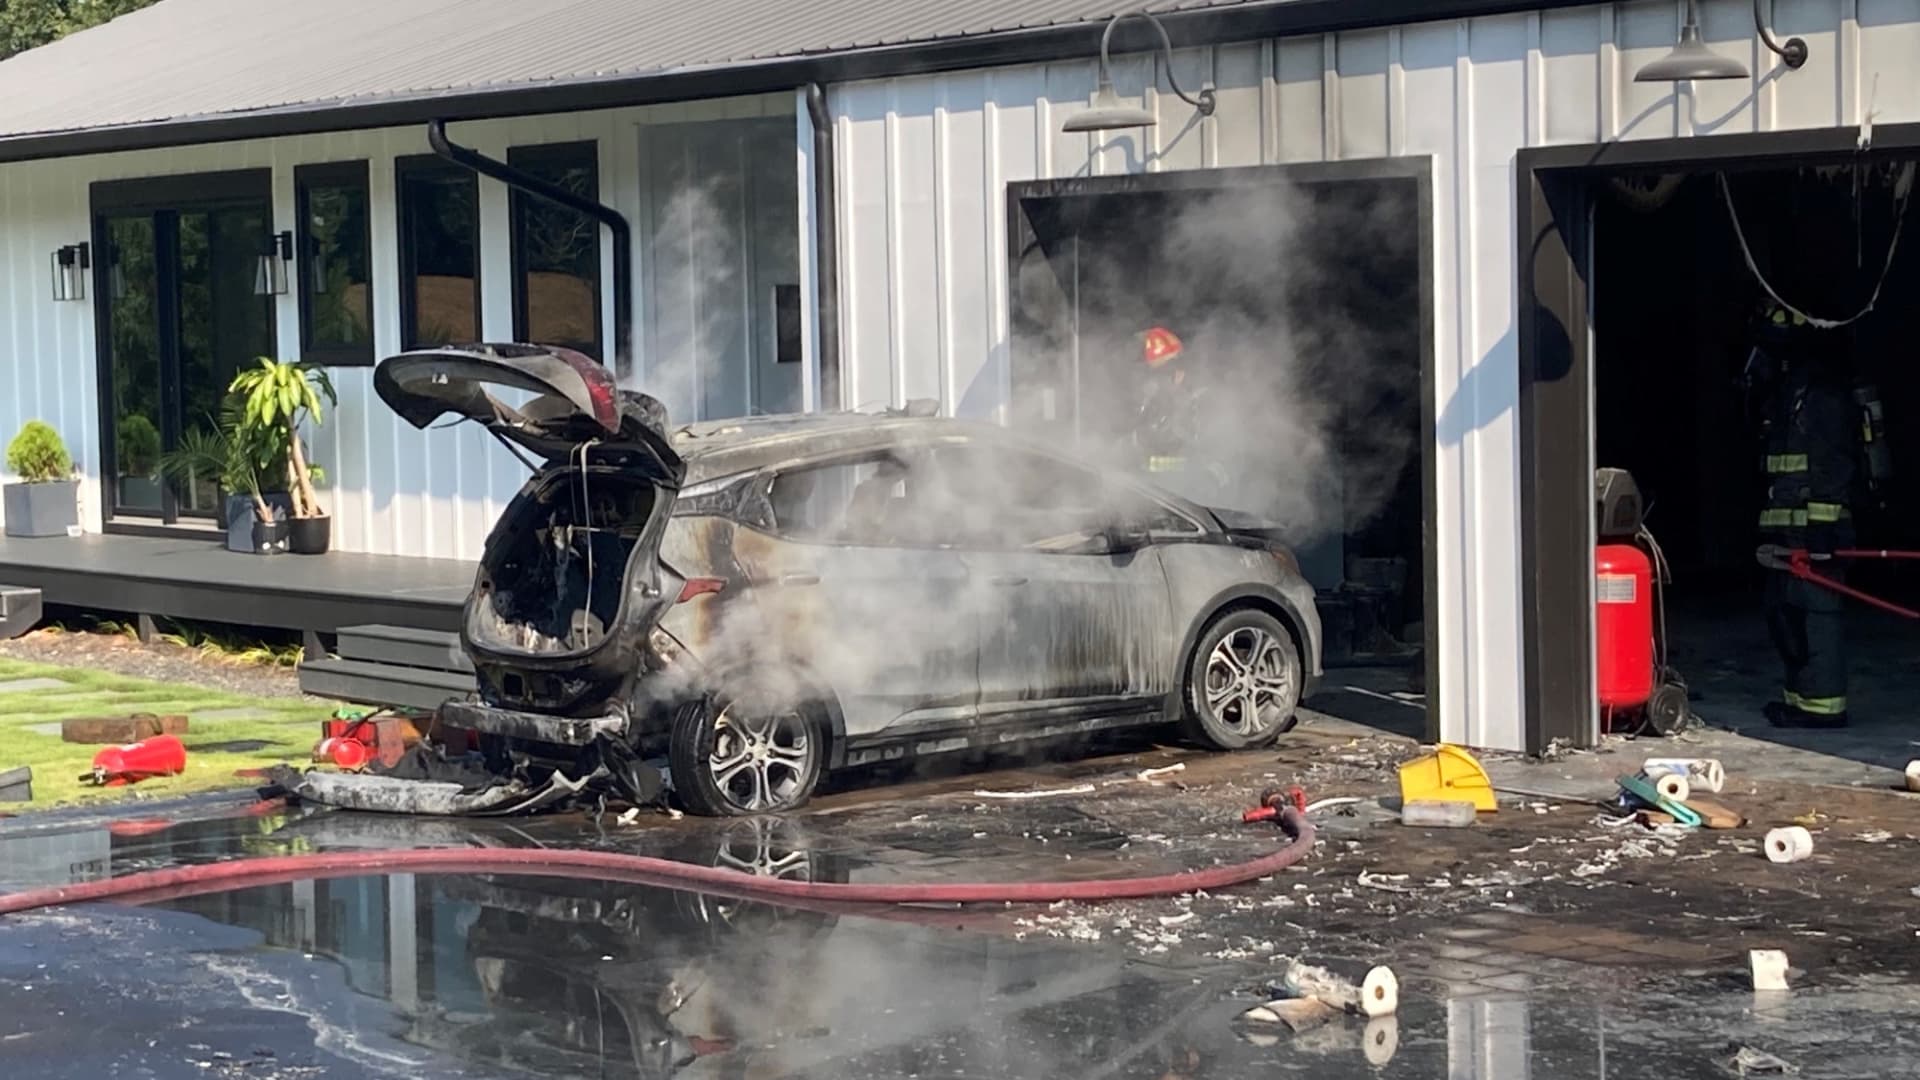 A 2019 Chevrolet Bolt EV caught fire at a home in Cherokee County, Georgia on Sept. 13, 2021, according to the local fire department.